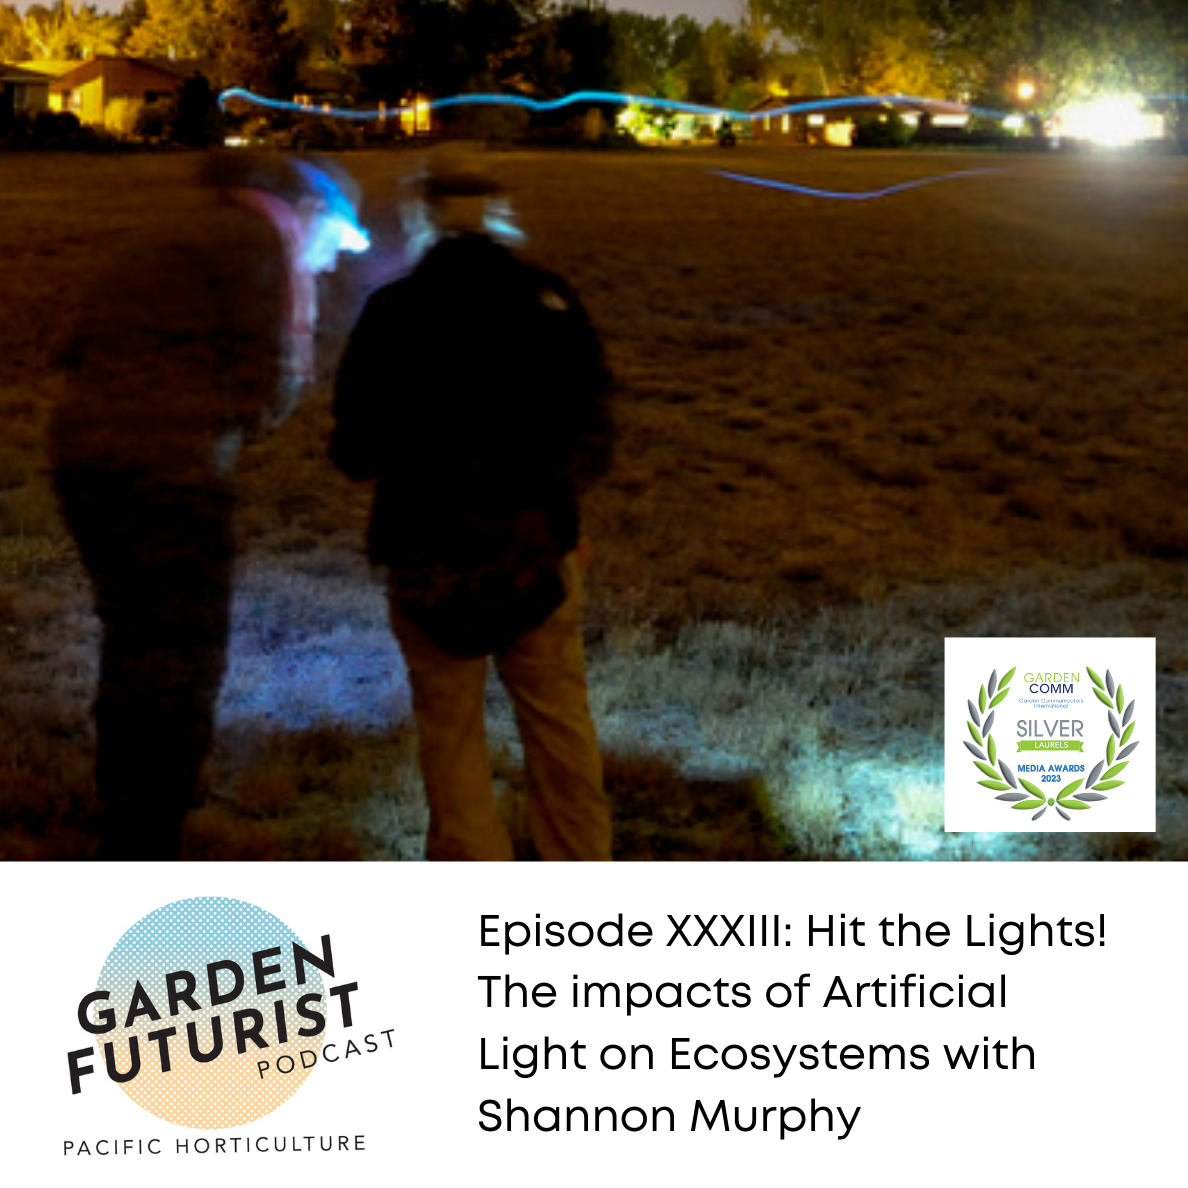 Episode XXXIII: Hit the Lights! The impacts of Artificial Light on Ecosystems with Shannon Murphy